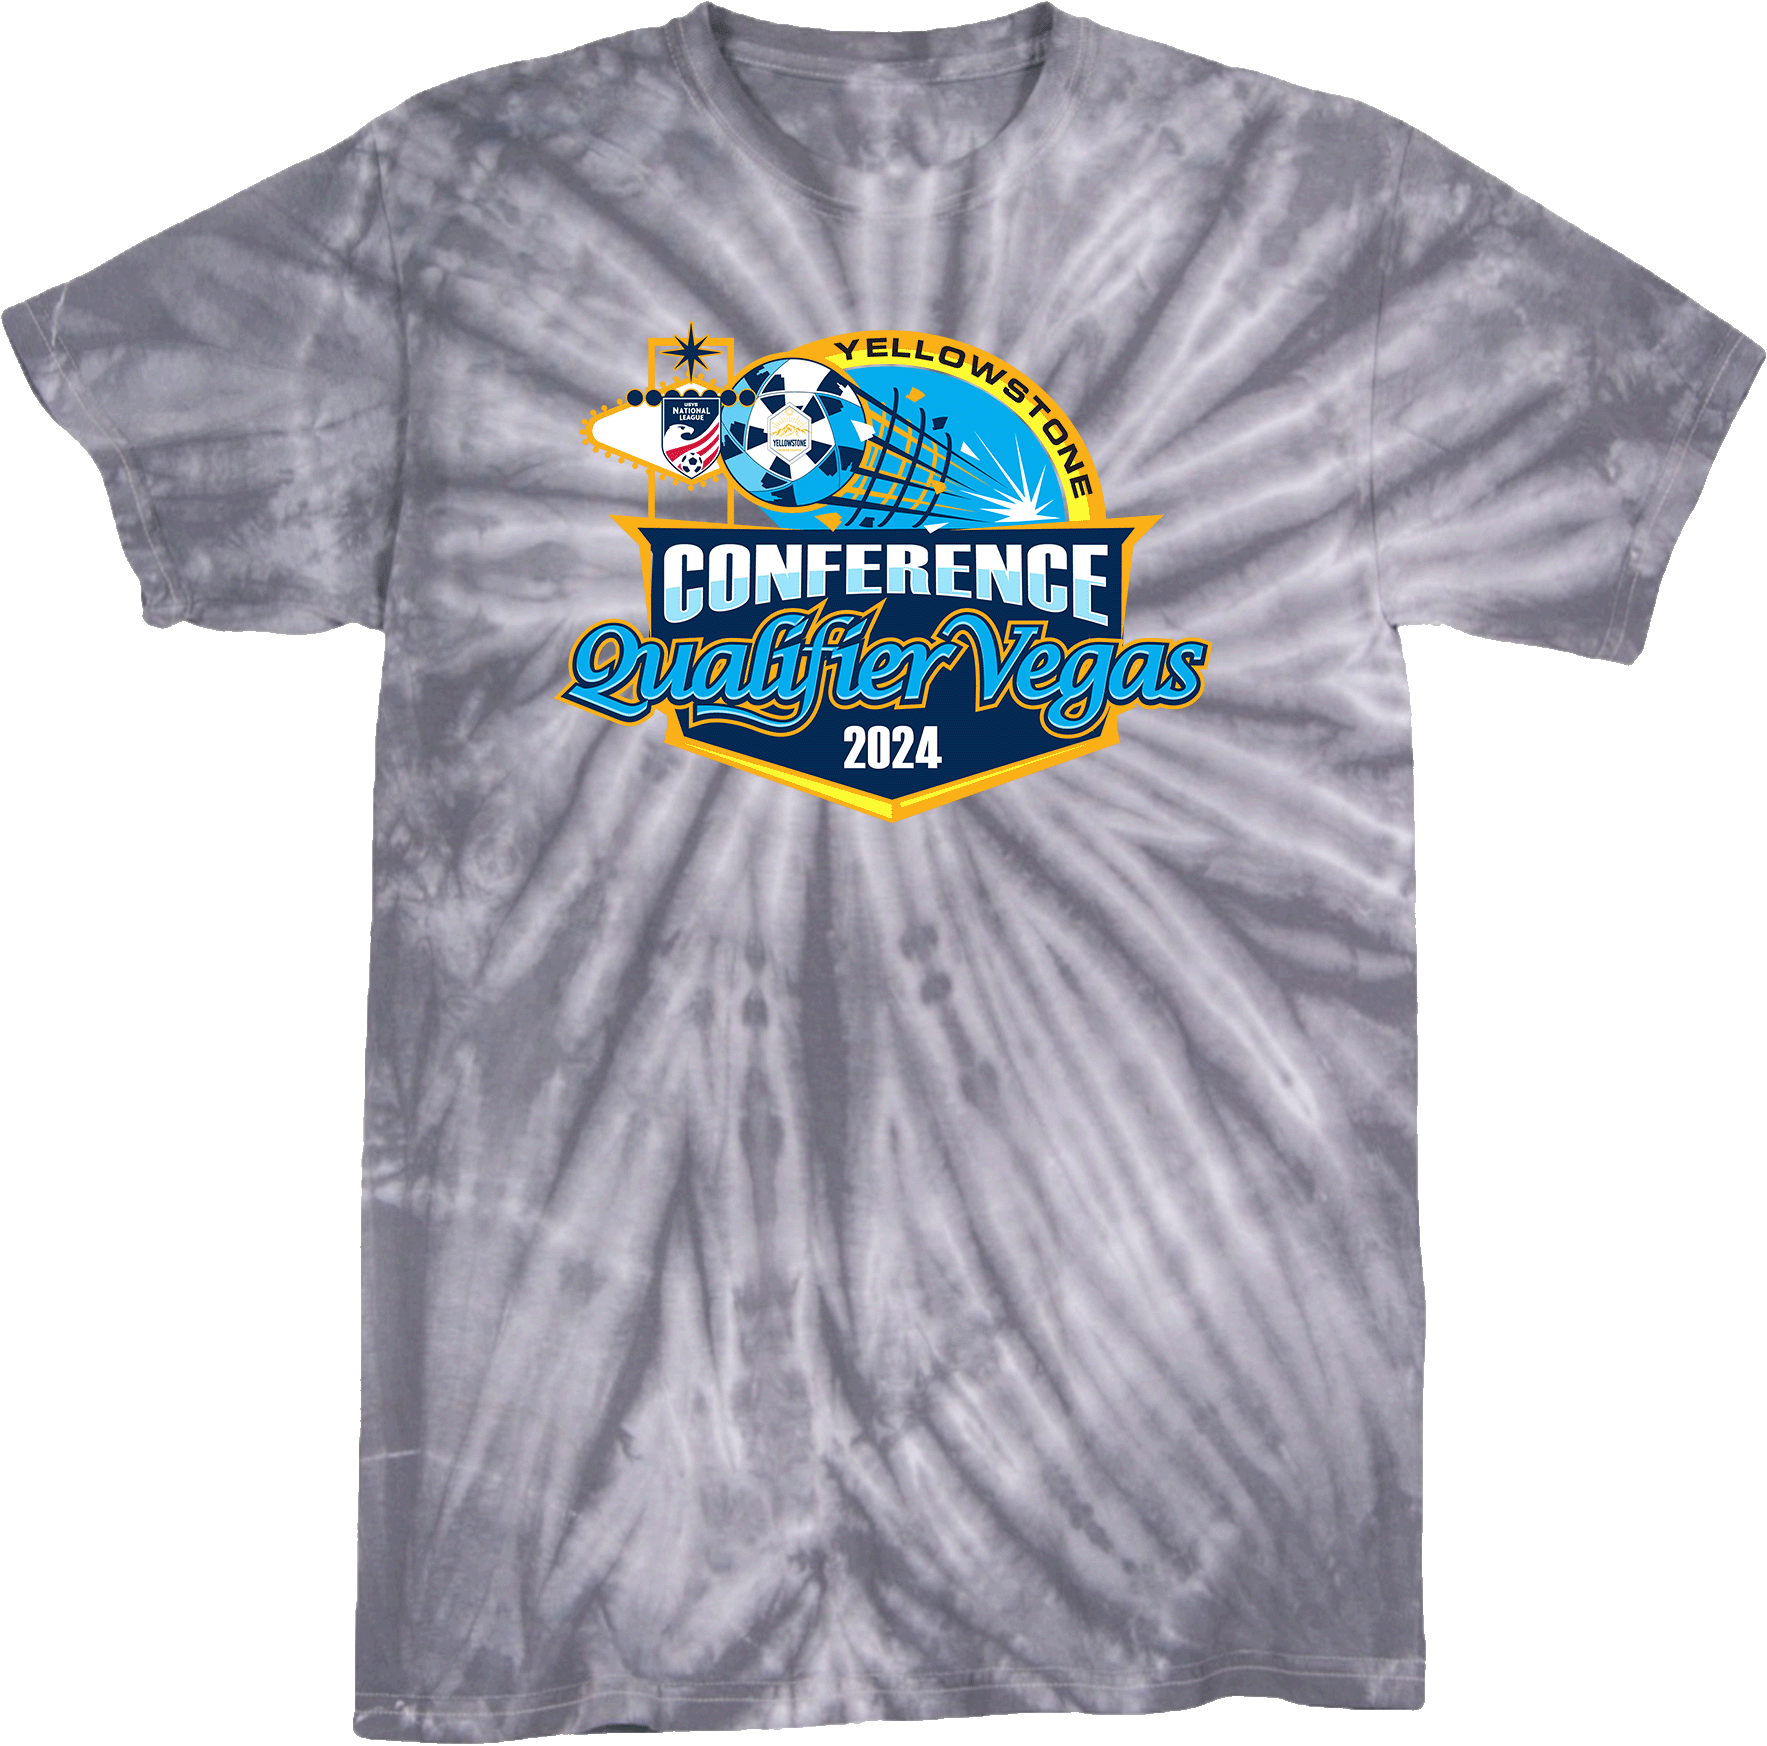 Tie-Dye Short Sleeves - 2024 Yellowstone Conference Qualifier Vegas